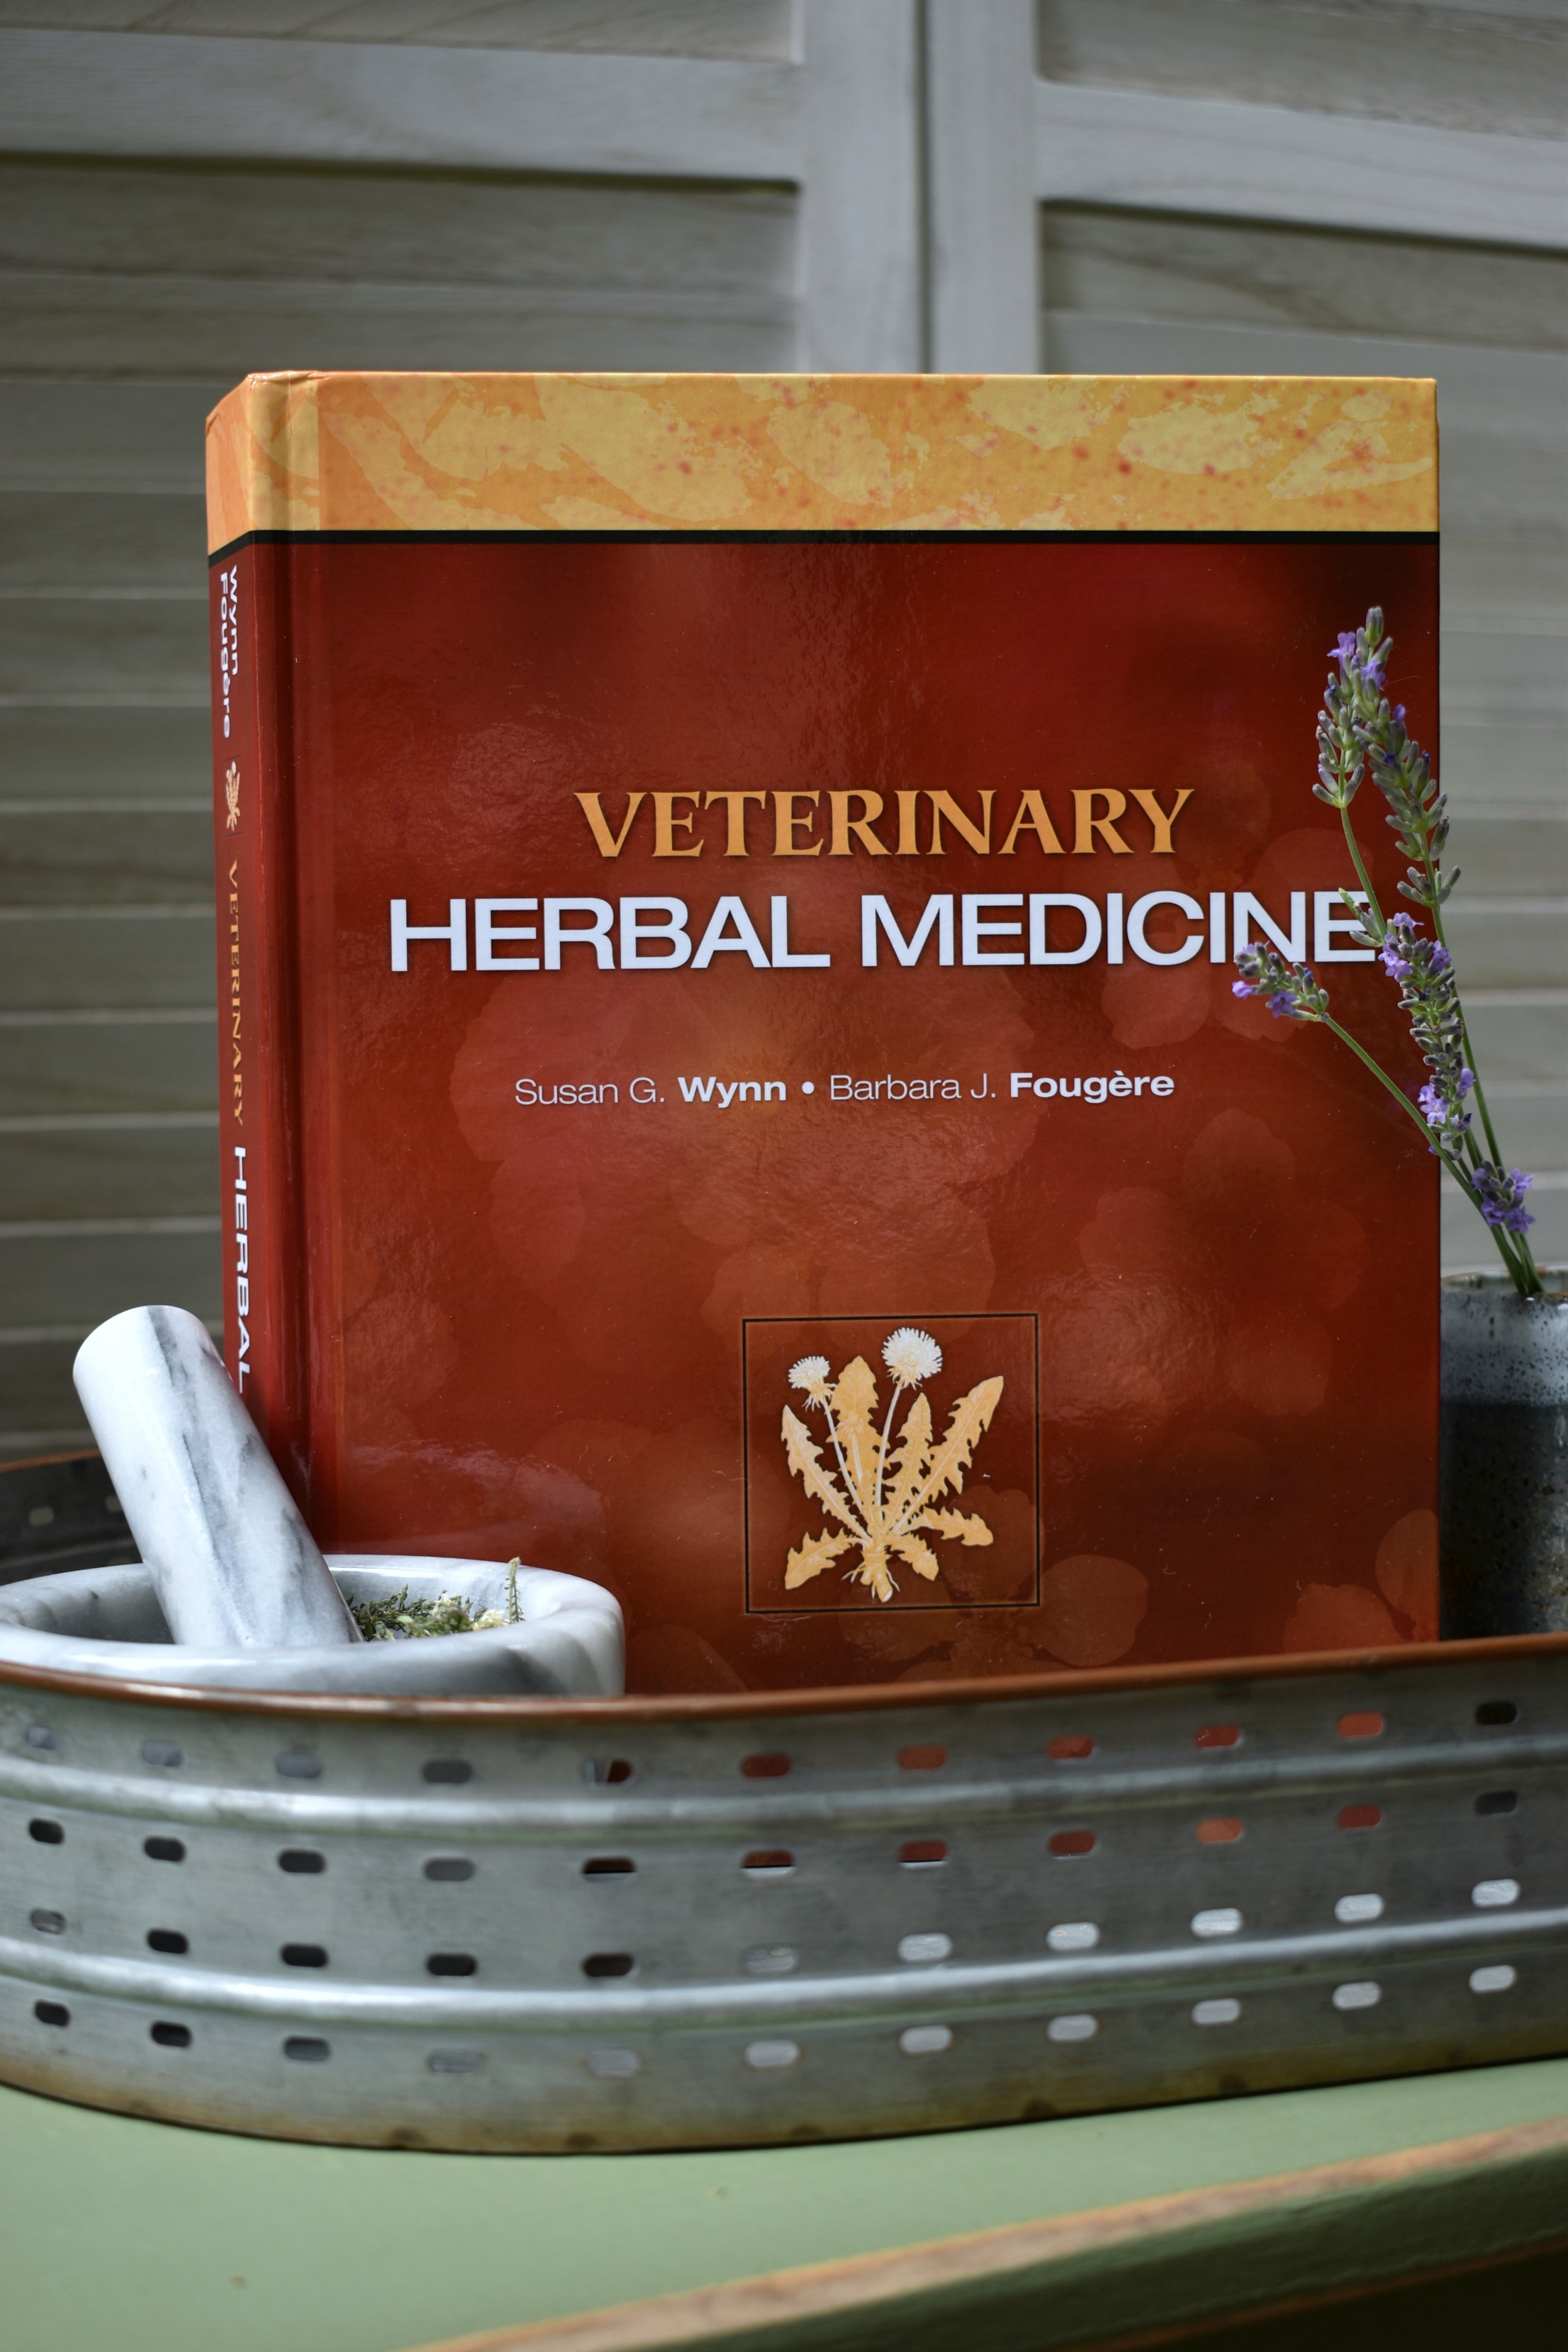 A picture of Veterinary Herbal Medicine book by Fougere and Wynn